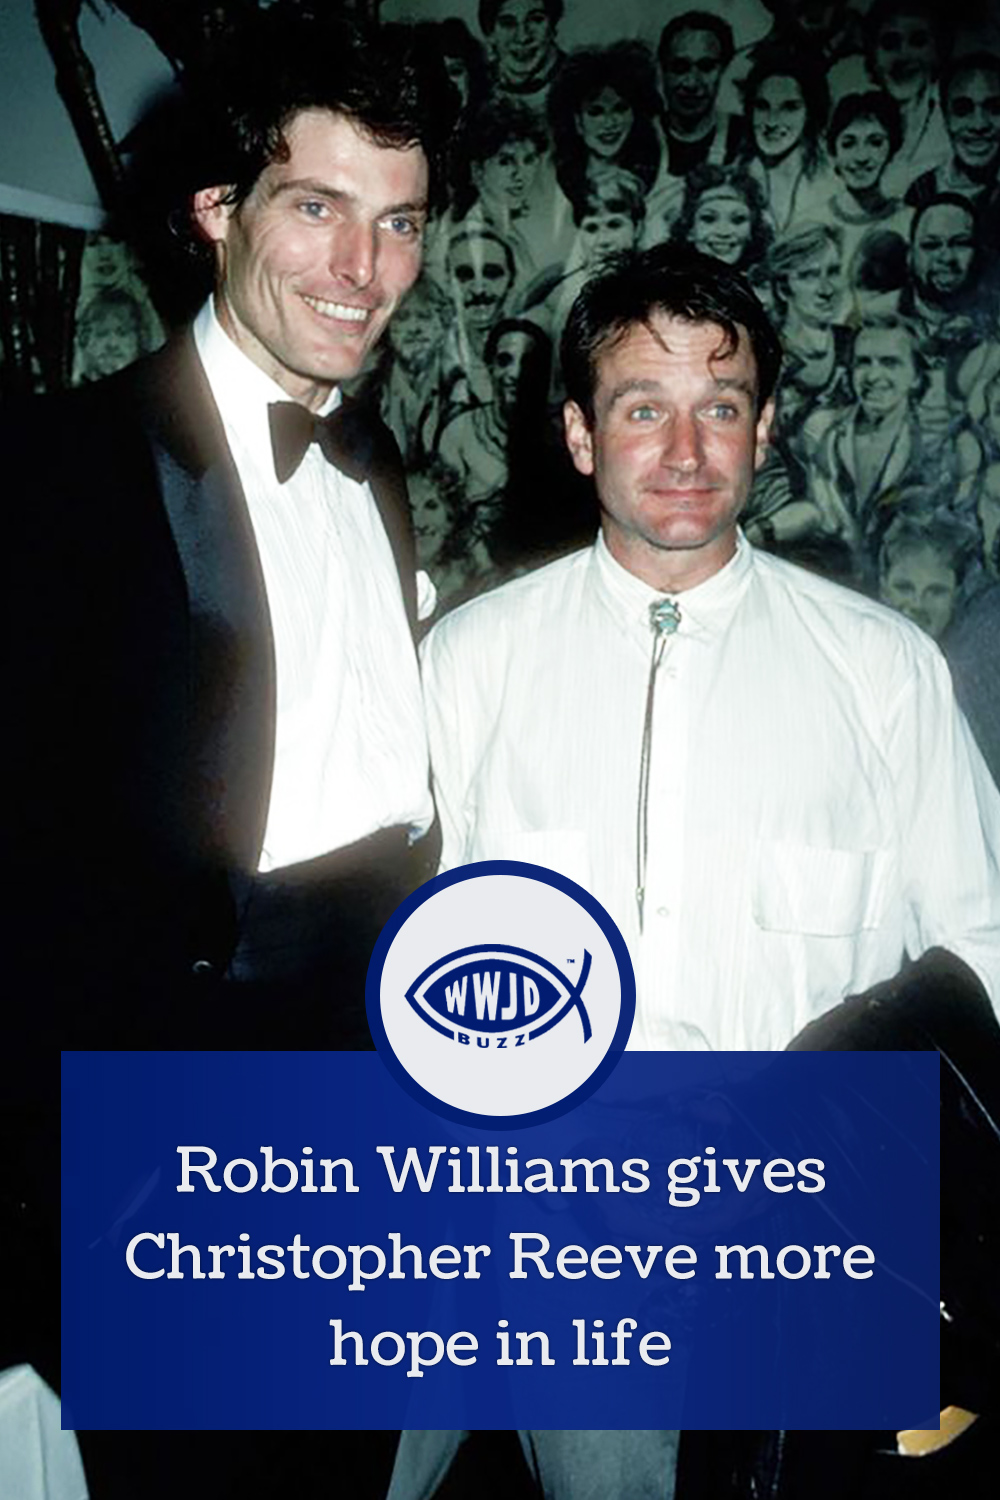 Robin Williams gives Christopher Reeve more hope in life